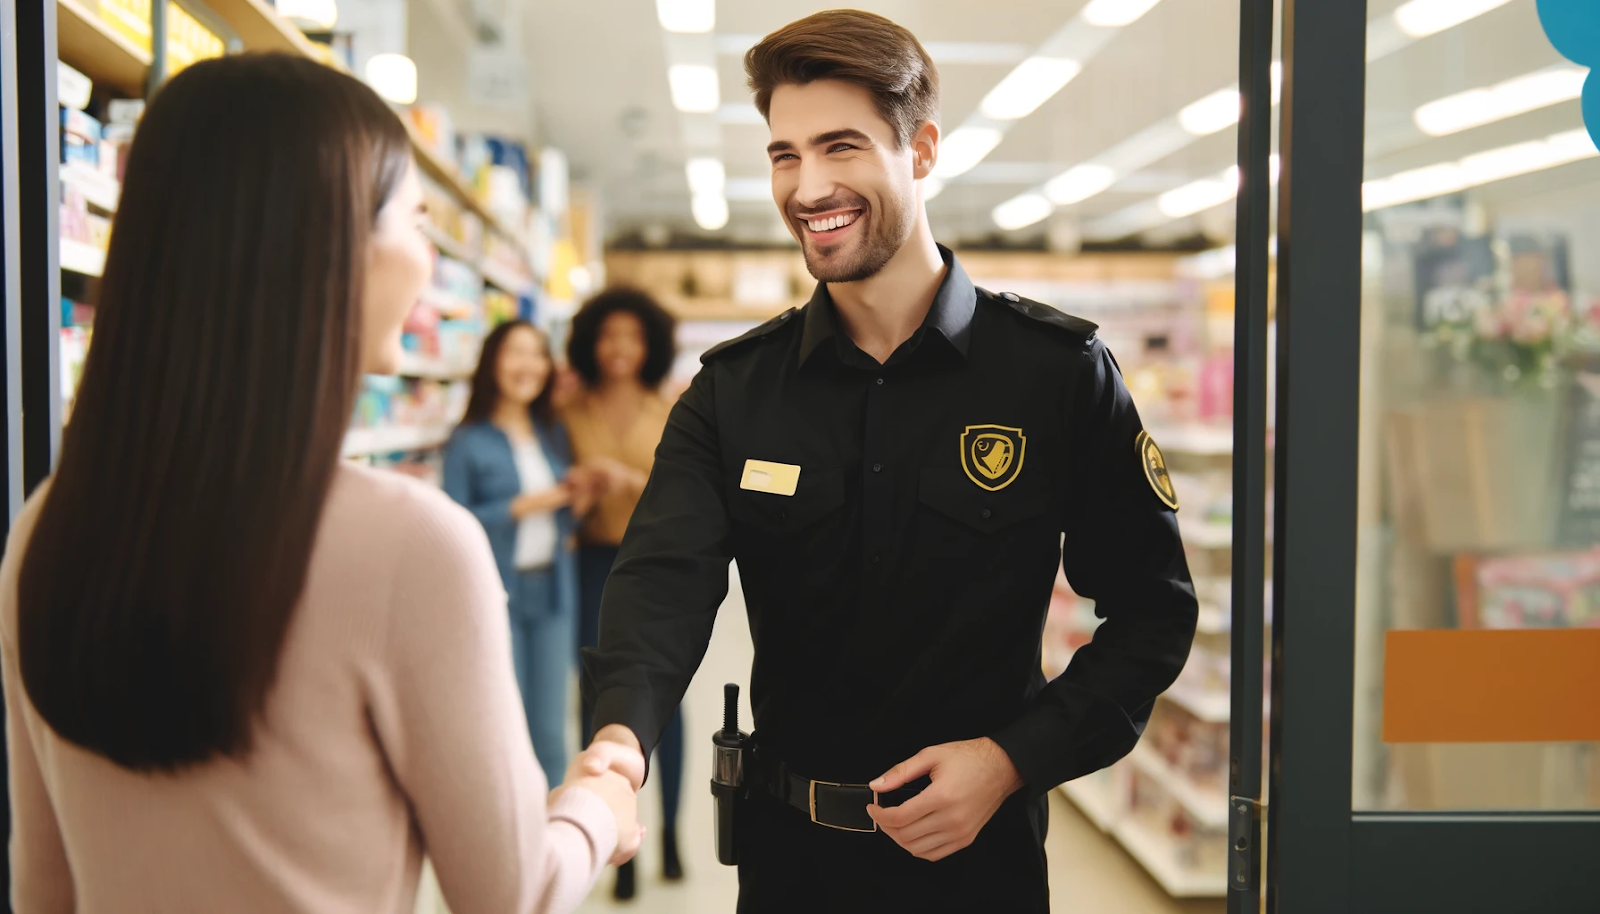 Cheerful security guard in a retail store, enhancing safety and customer service, featuring black and gold colors